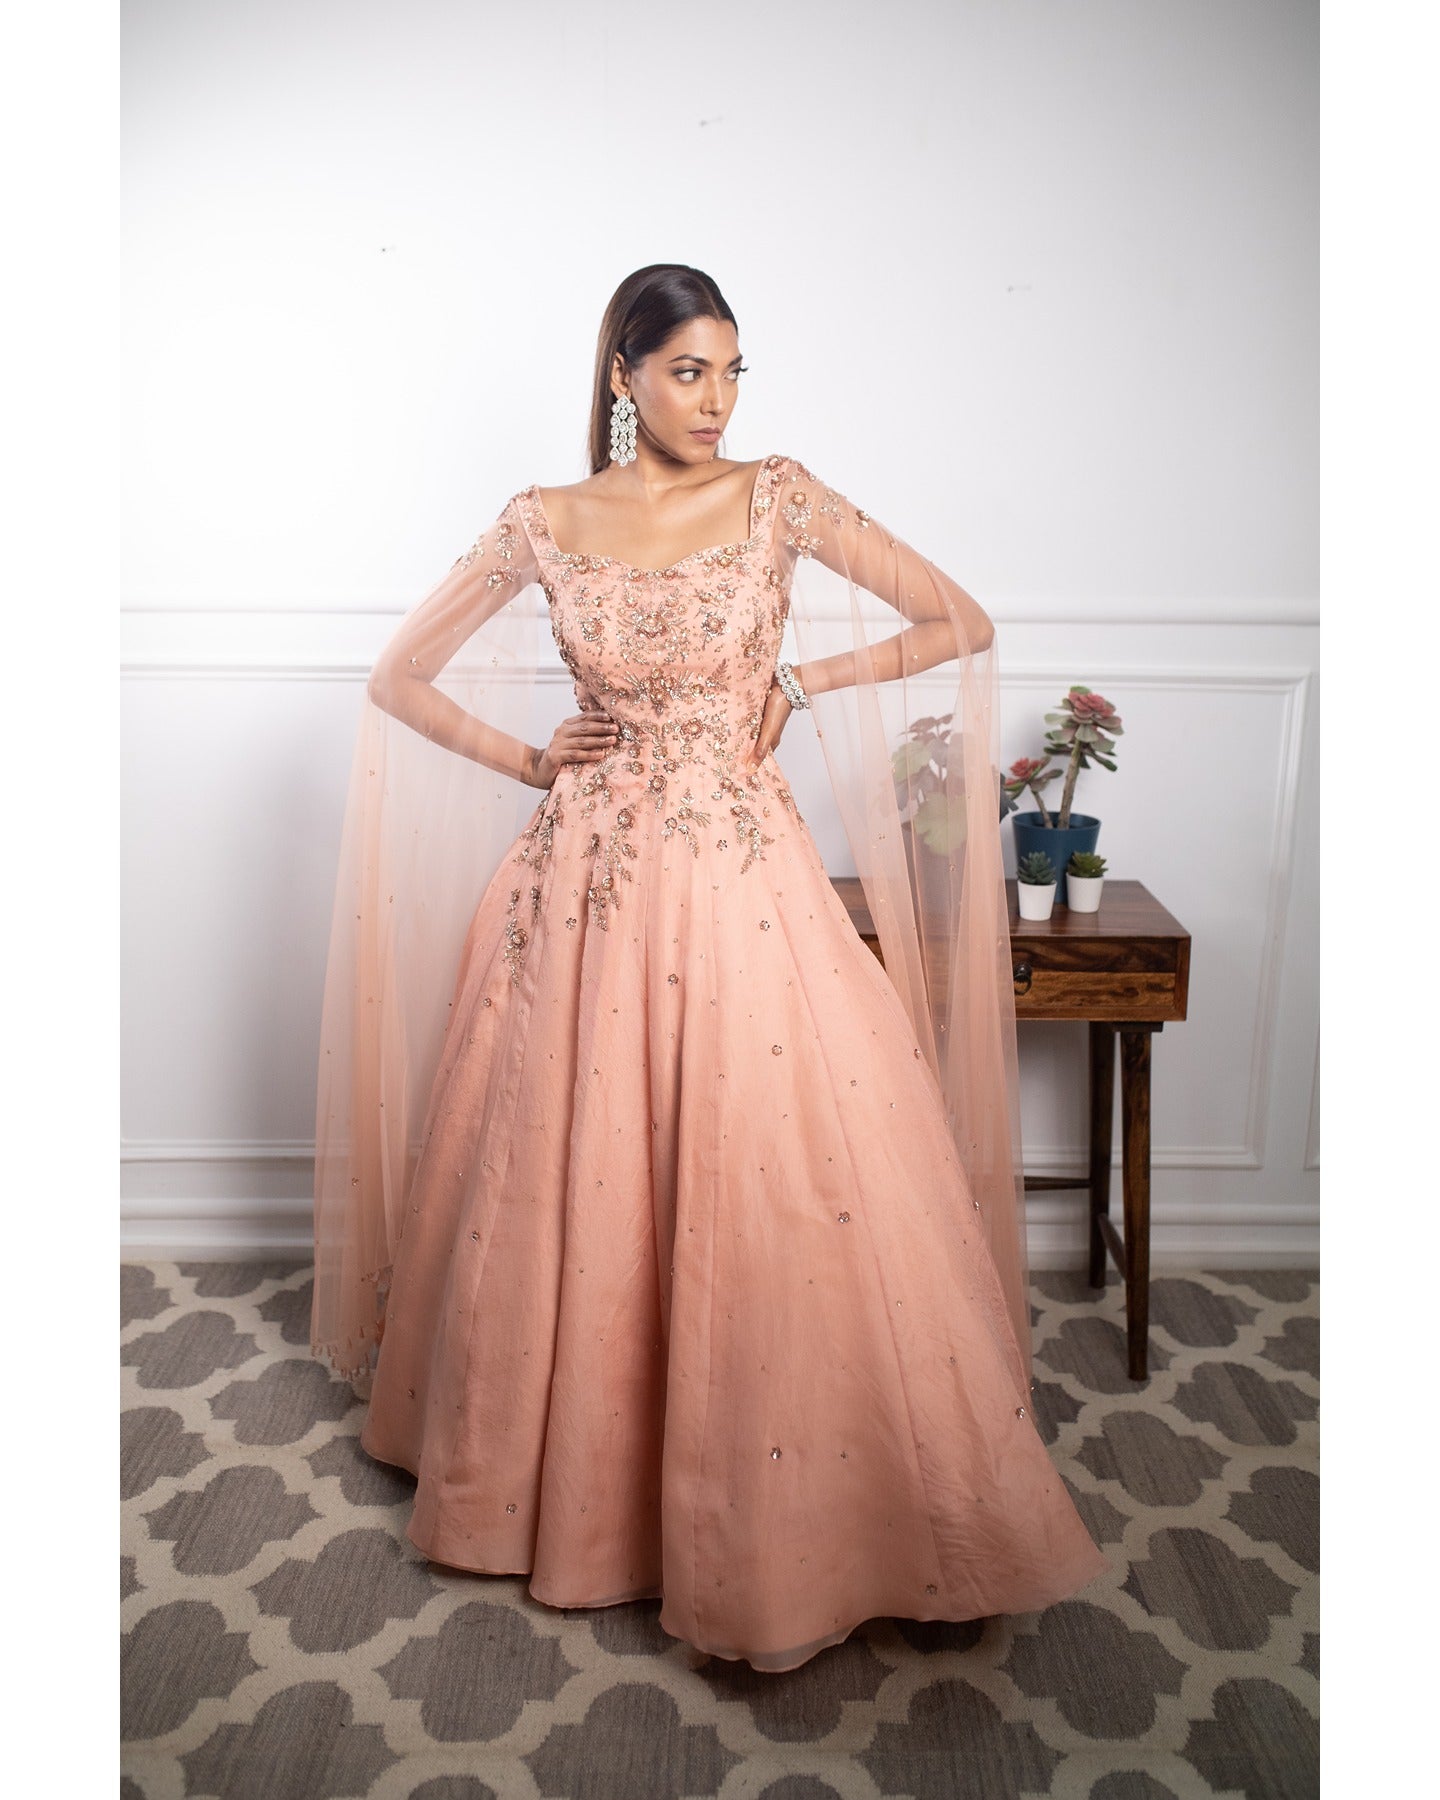 Draped in the soft radiance of peach, this gown whispers elegance and timeless charm.